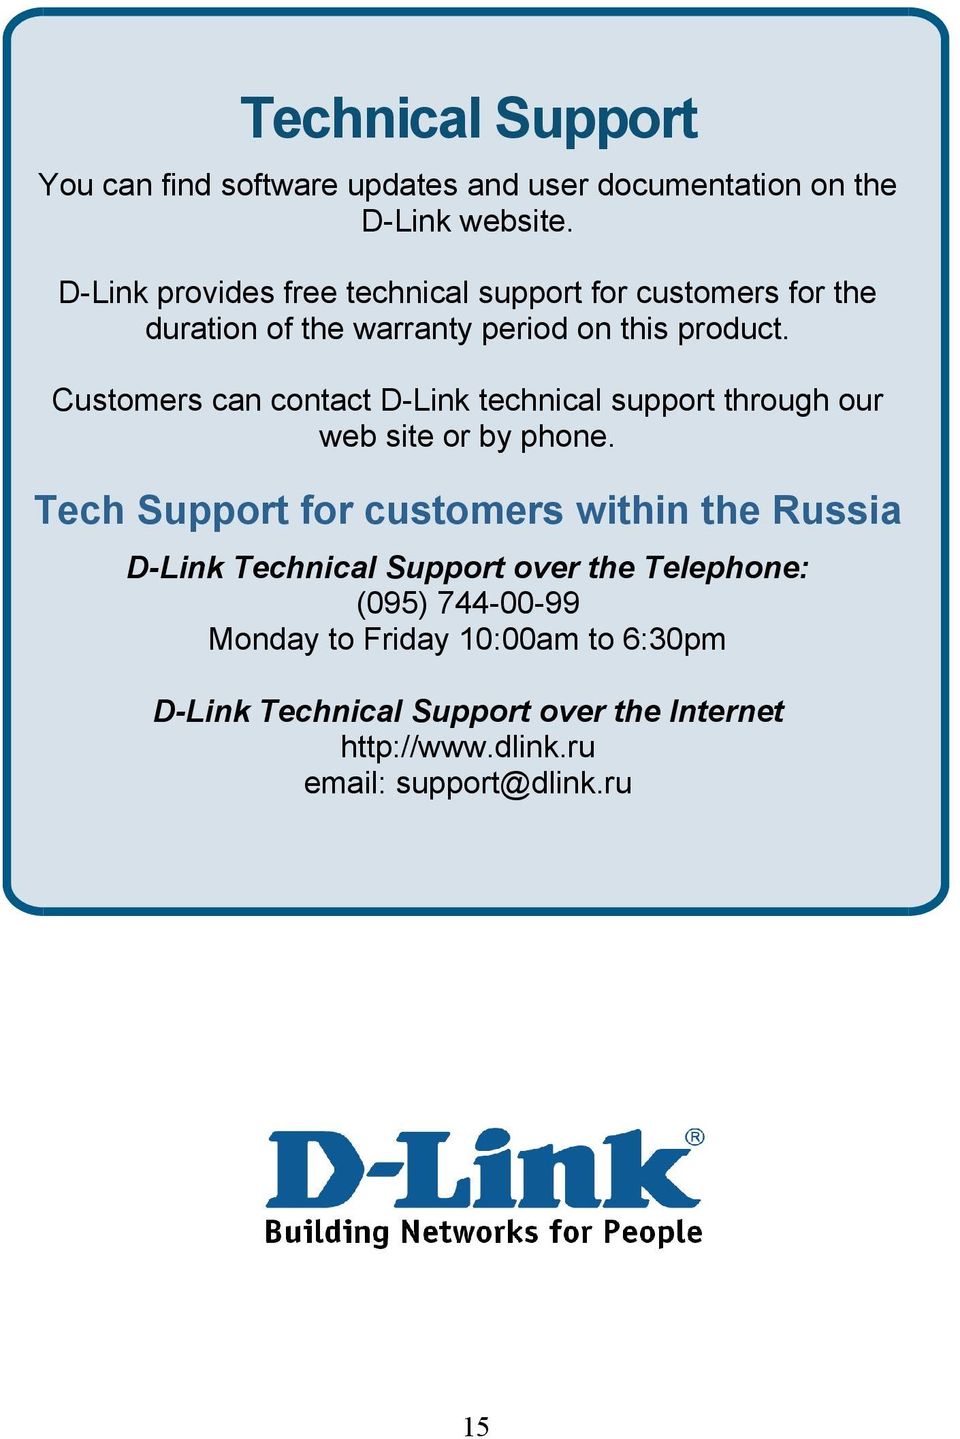 Customers can contact D-Link technical support through our web site or by phone.